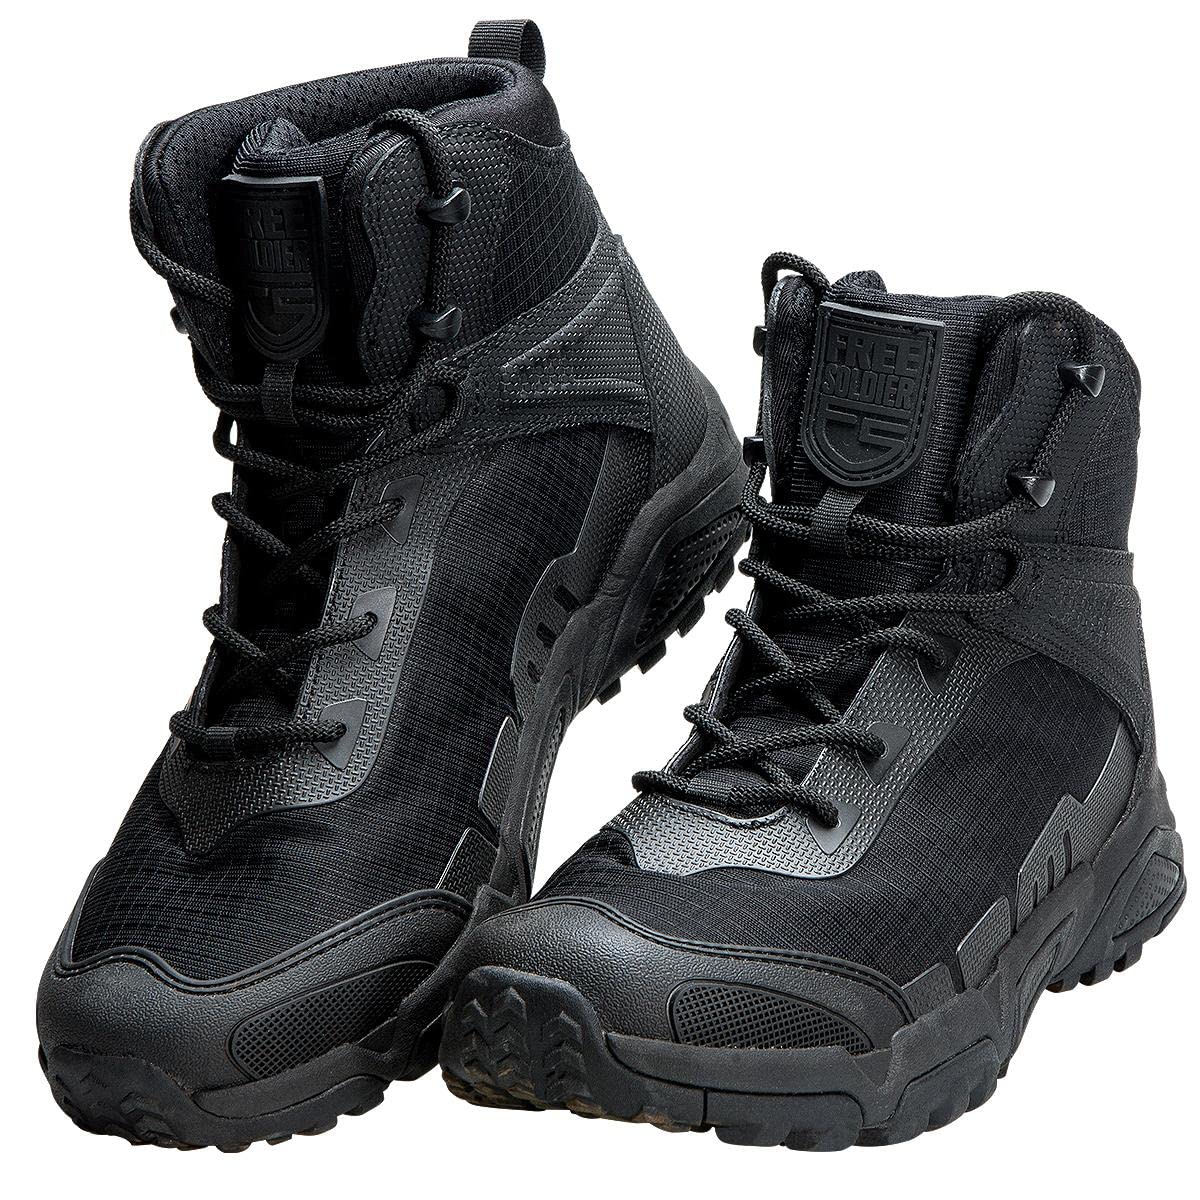 Free Soldier Mens Waterproof Hiking Boots Lightweight Work Boots Military Tactical Boots Durable Combat Boots(Black 75)